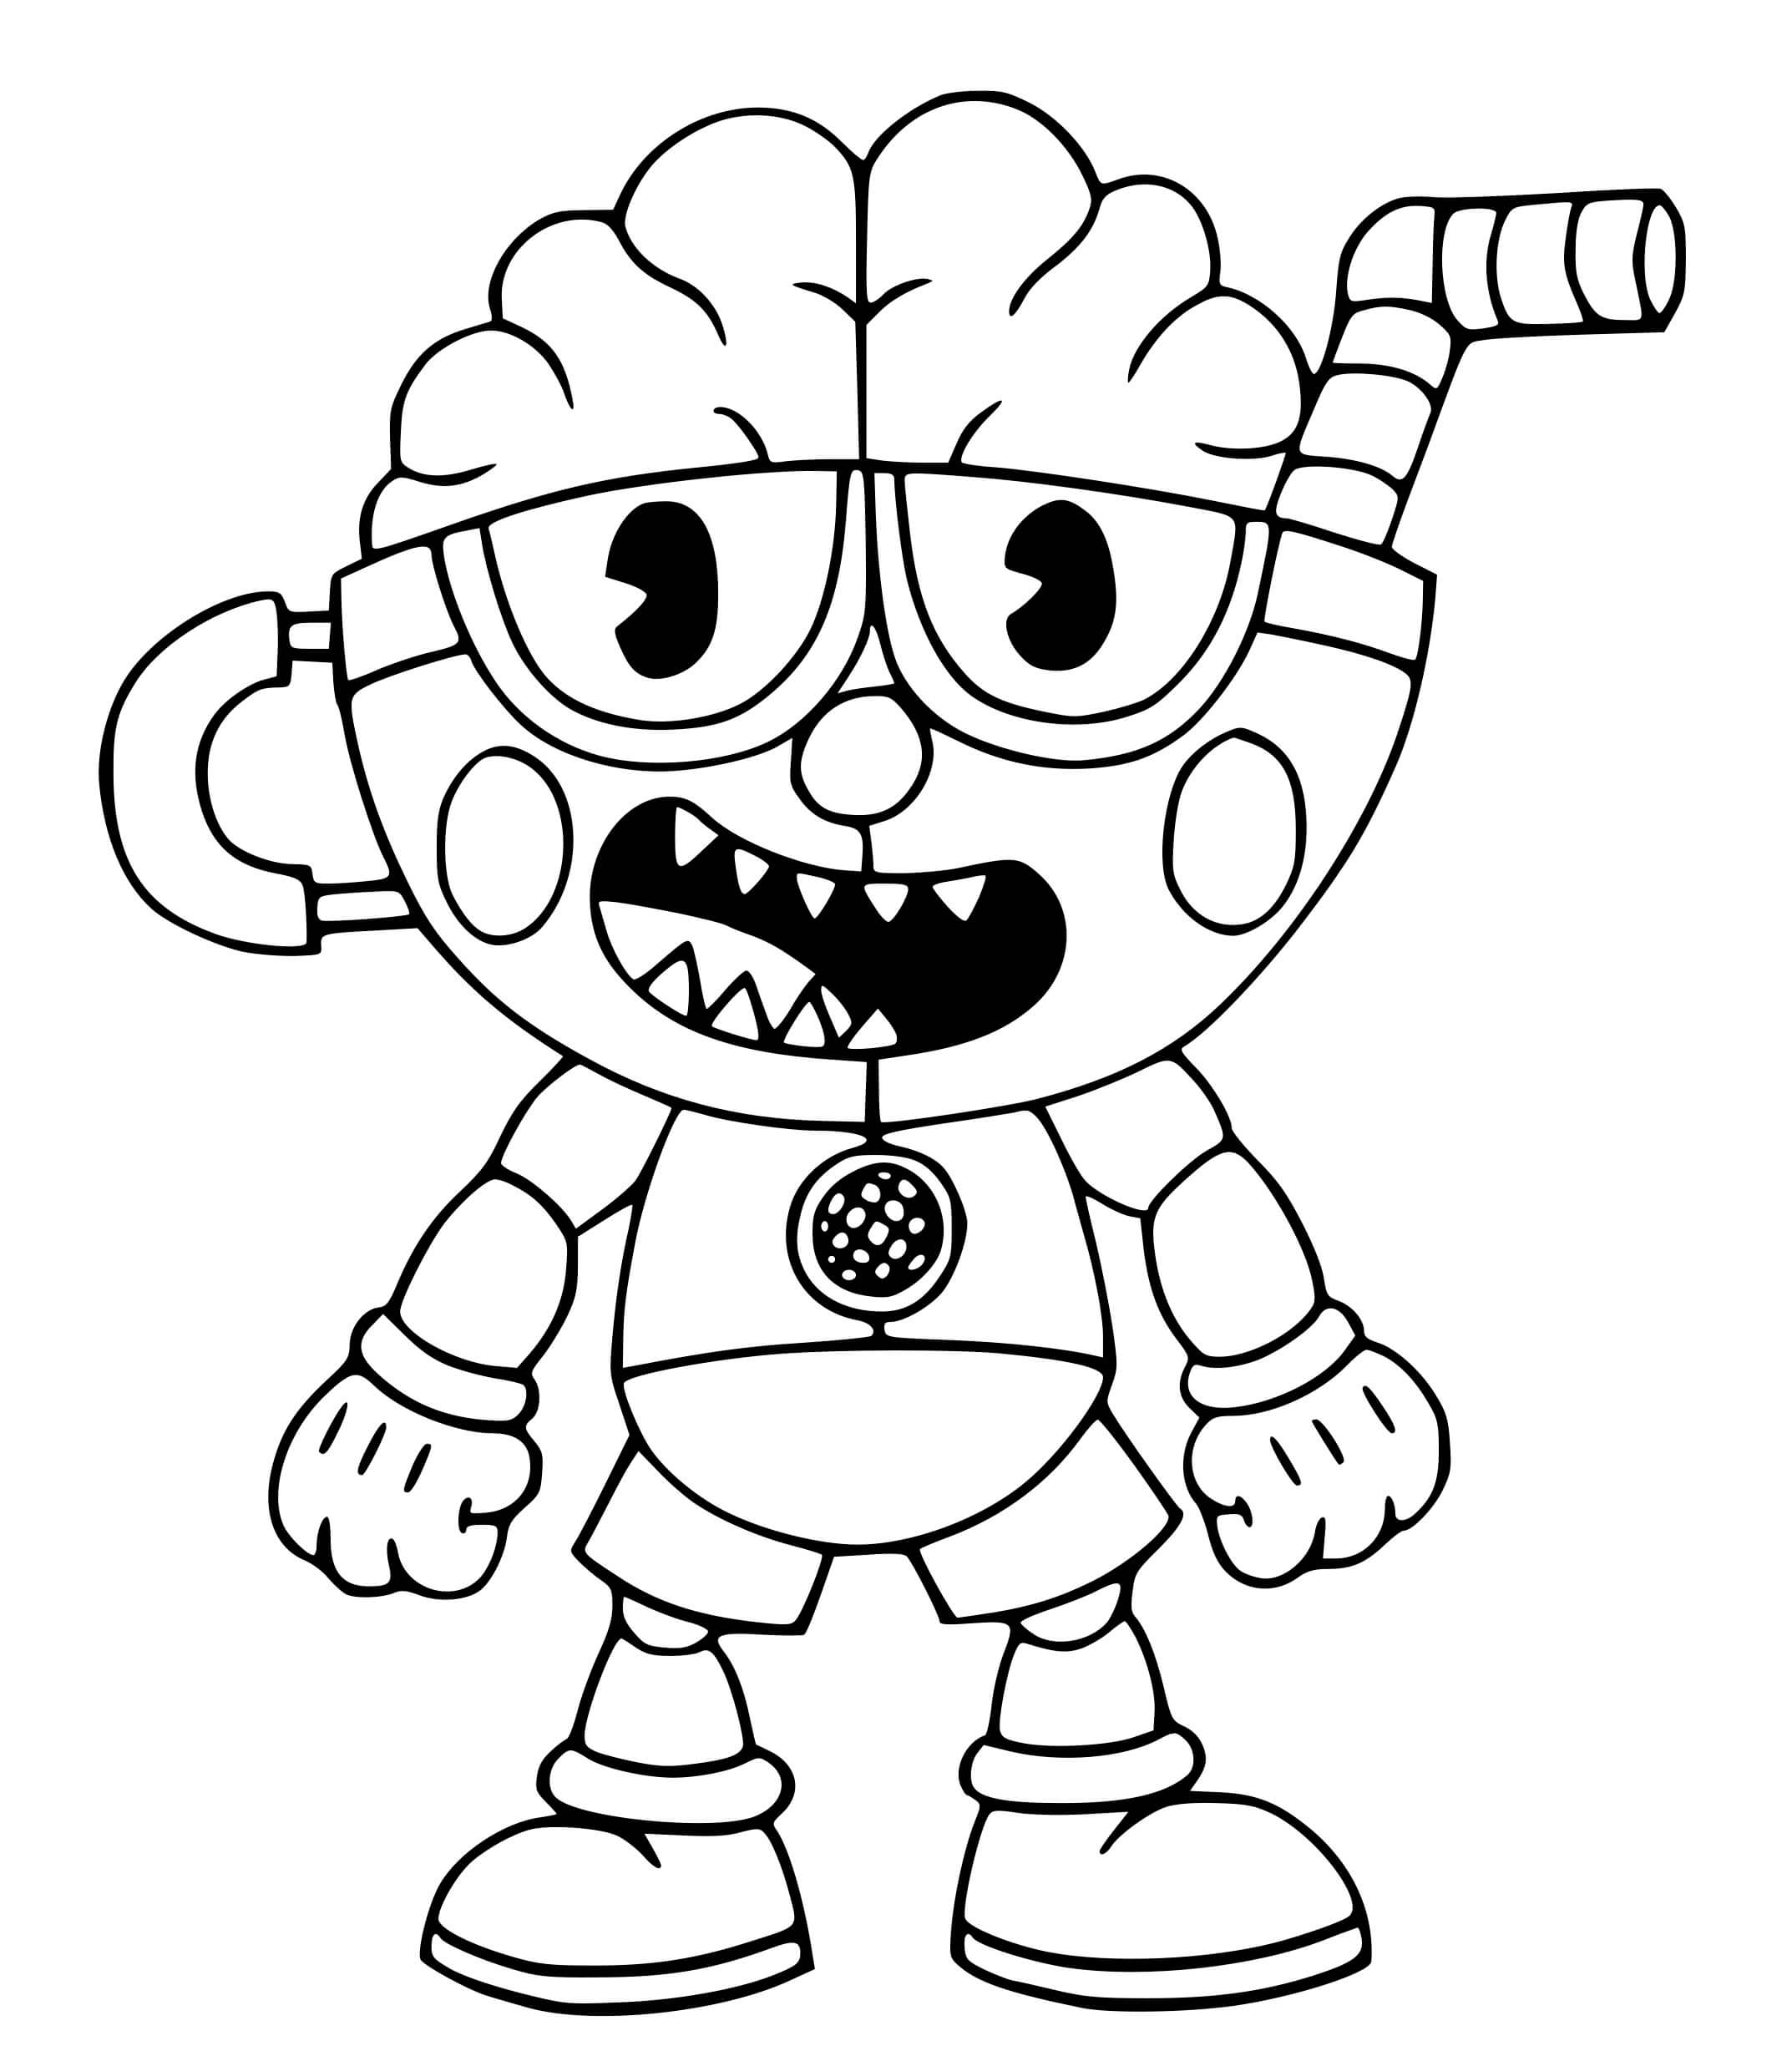 Cuphead Coloring Pages - Coloring Cool